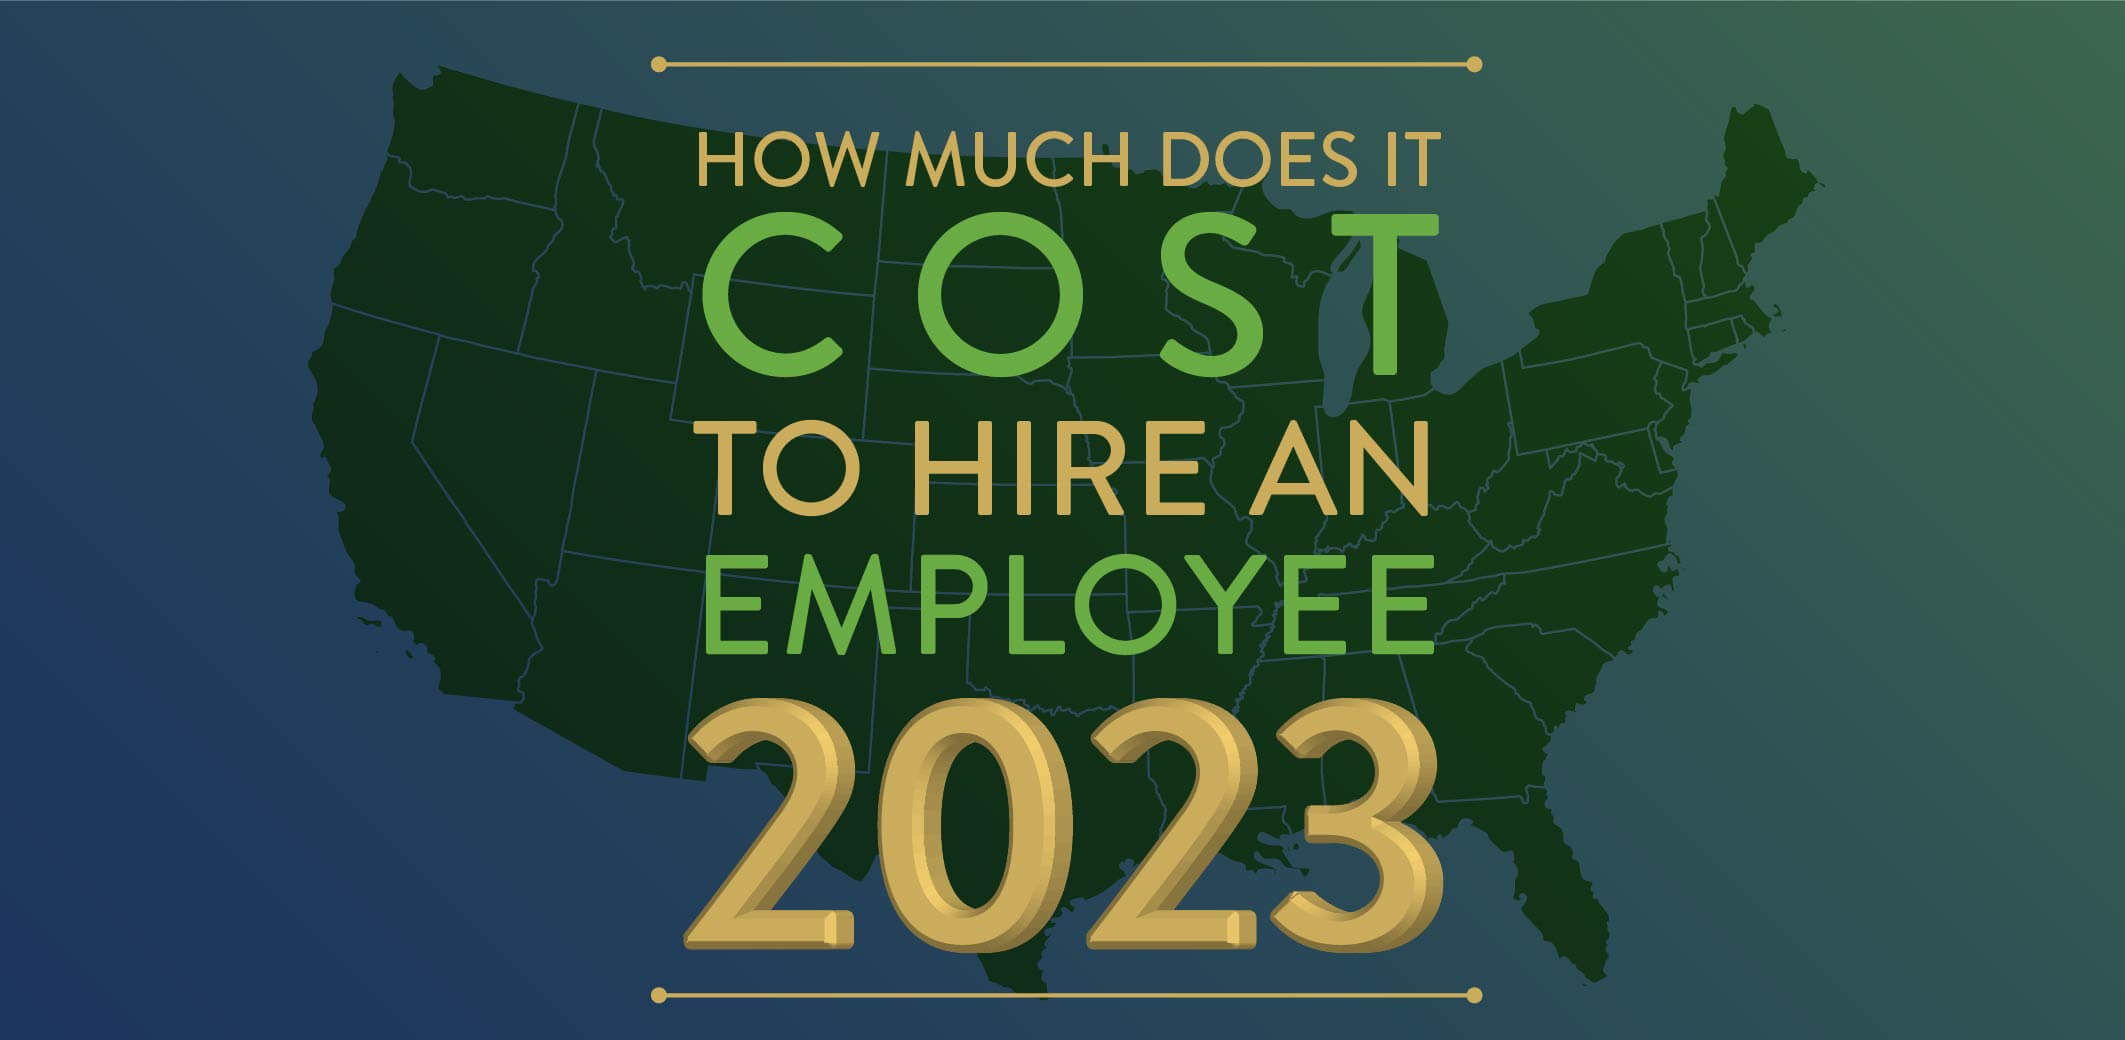 COST TO HIRE EMPLOYEE 2023 